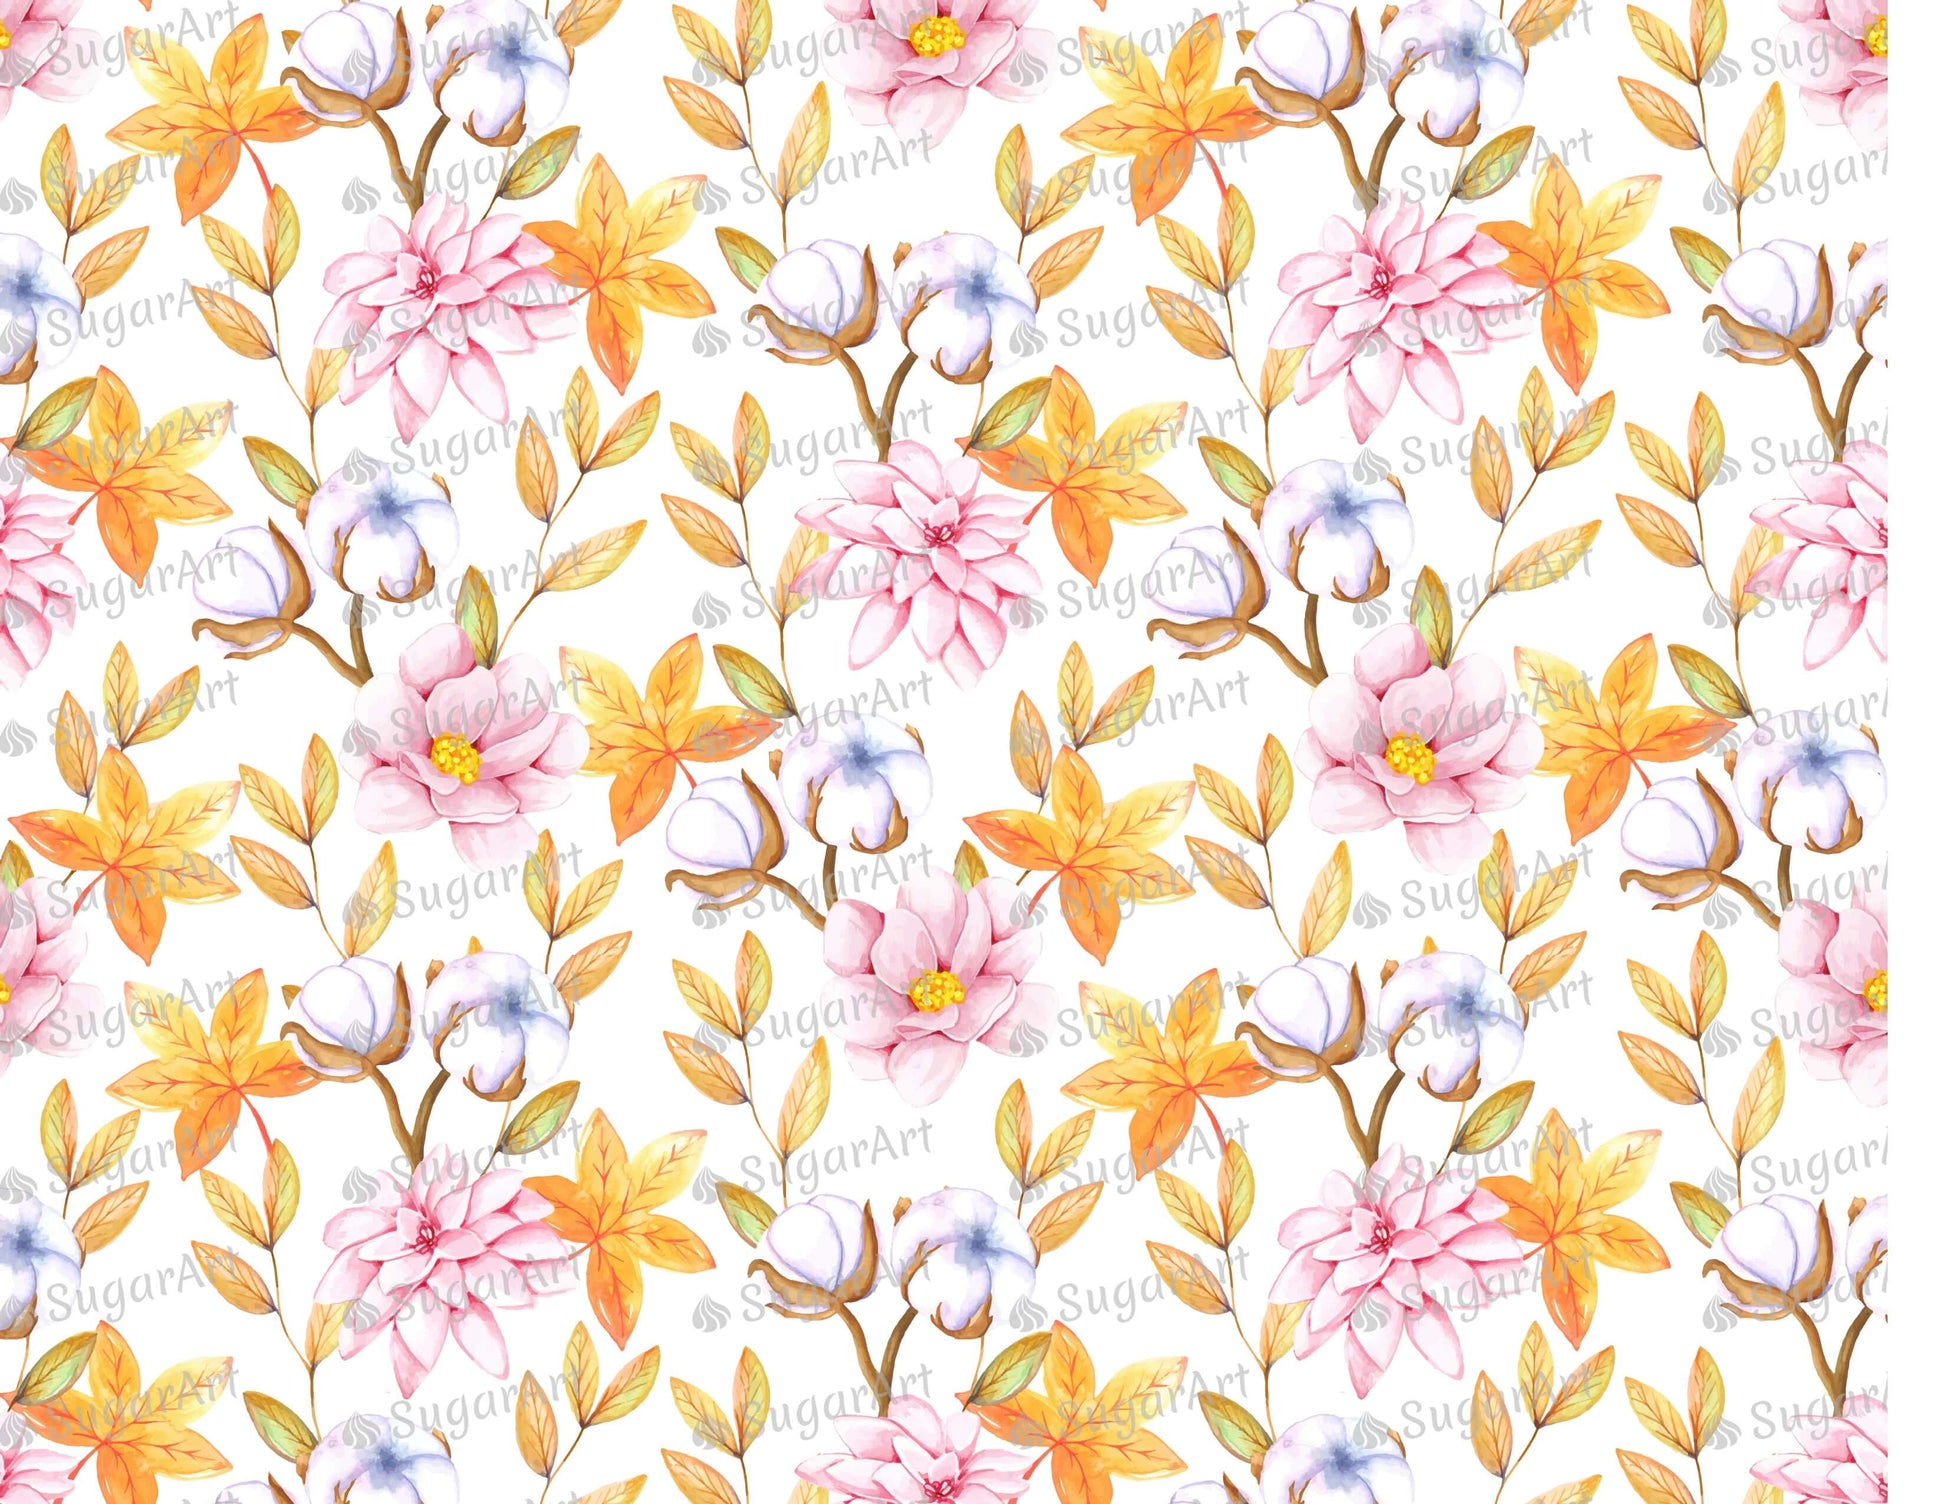 Fall Watercolor Pattern With Cotton Flowers - Icing - ISA114.